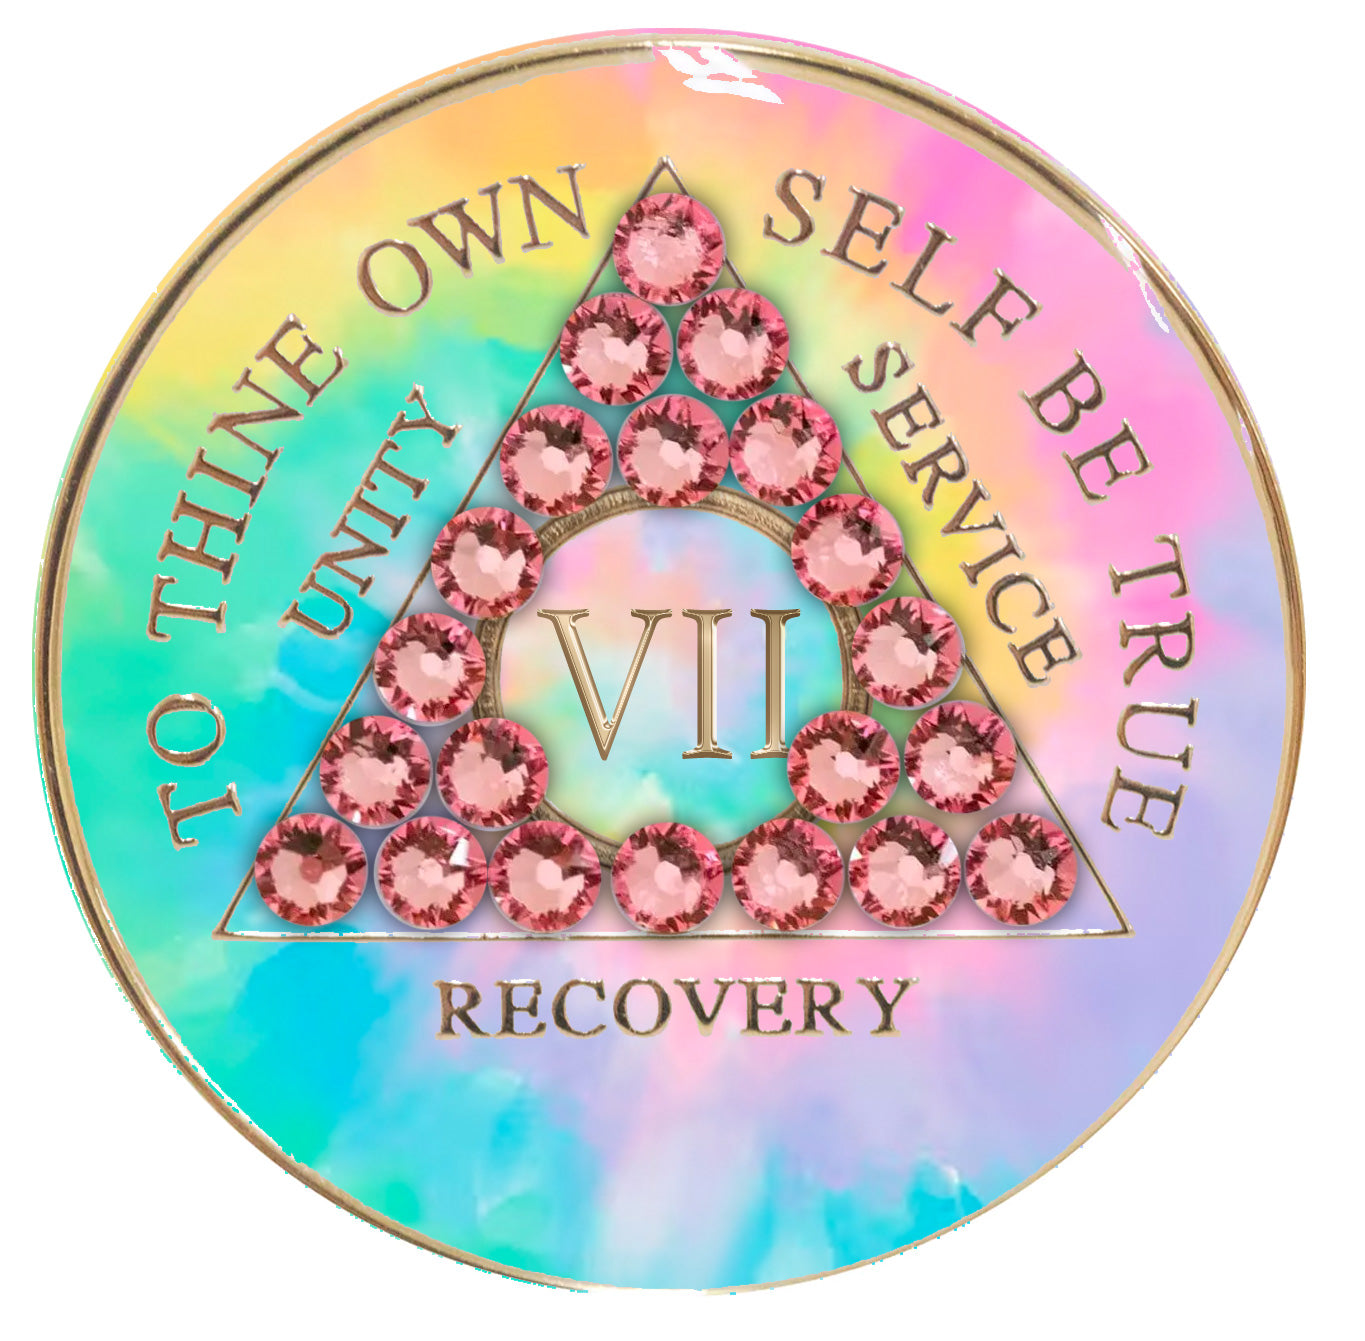 7 year AA medallion pastel tie-dye representing a psychic change that is needed in the recovery journey, with twenty-one light rose genuine crystals, pink, blue, yellow, and green, in the shape of the triangle, with the AA moto and roman numeral embossed in 14k gold-plated brass, the medallion is sealed with resin for a glossy, scratch free finish.